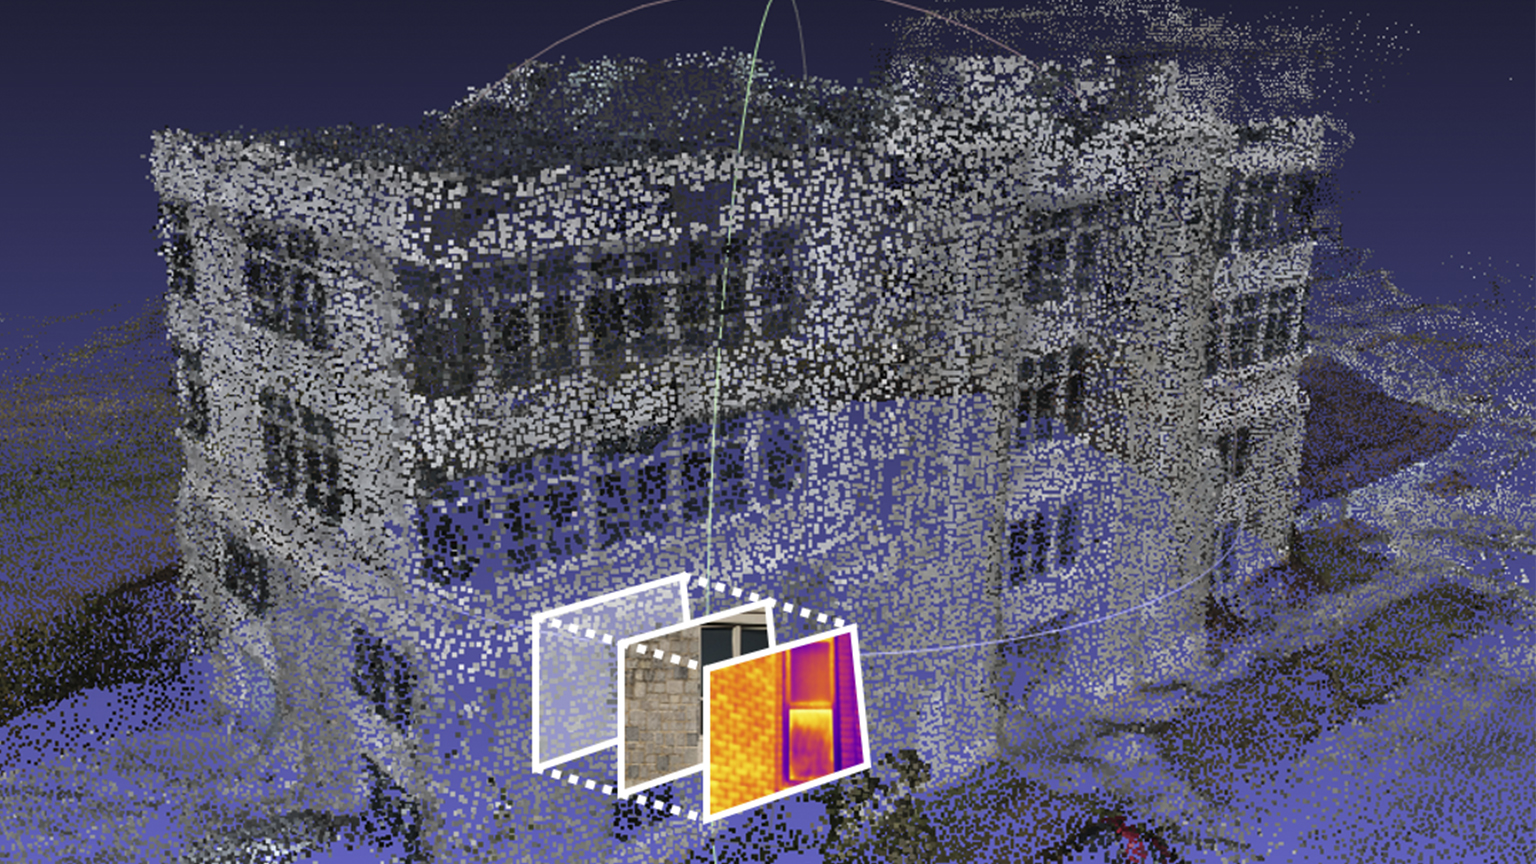 The 3D cloud point was reconstructed with its local coordinate system by using photogrammetry techniques to process UAV-images captured in a spiral flight path. The location (3D coordinates in the local coordinate system) of the RGB and IR images for close-range façade inspection were identified by the proposed image matching and transformation algorithms.